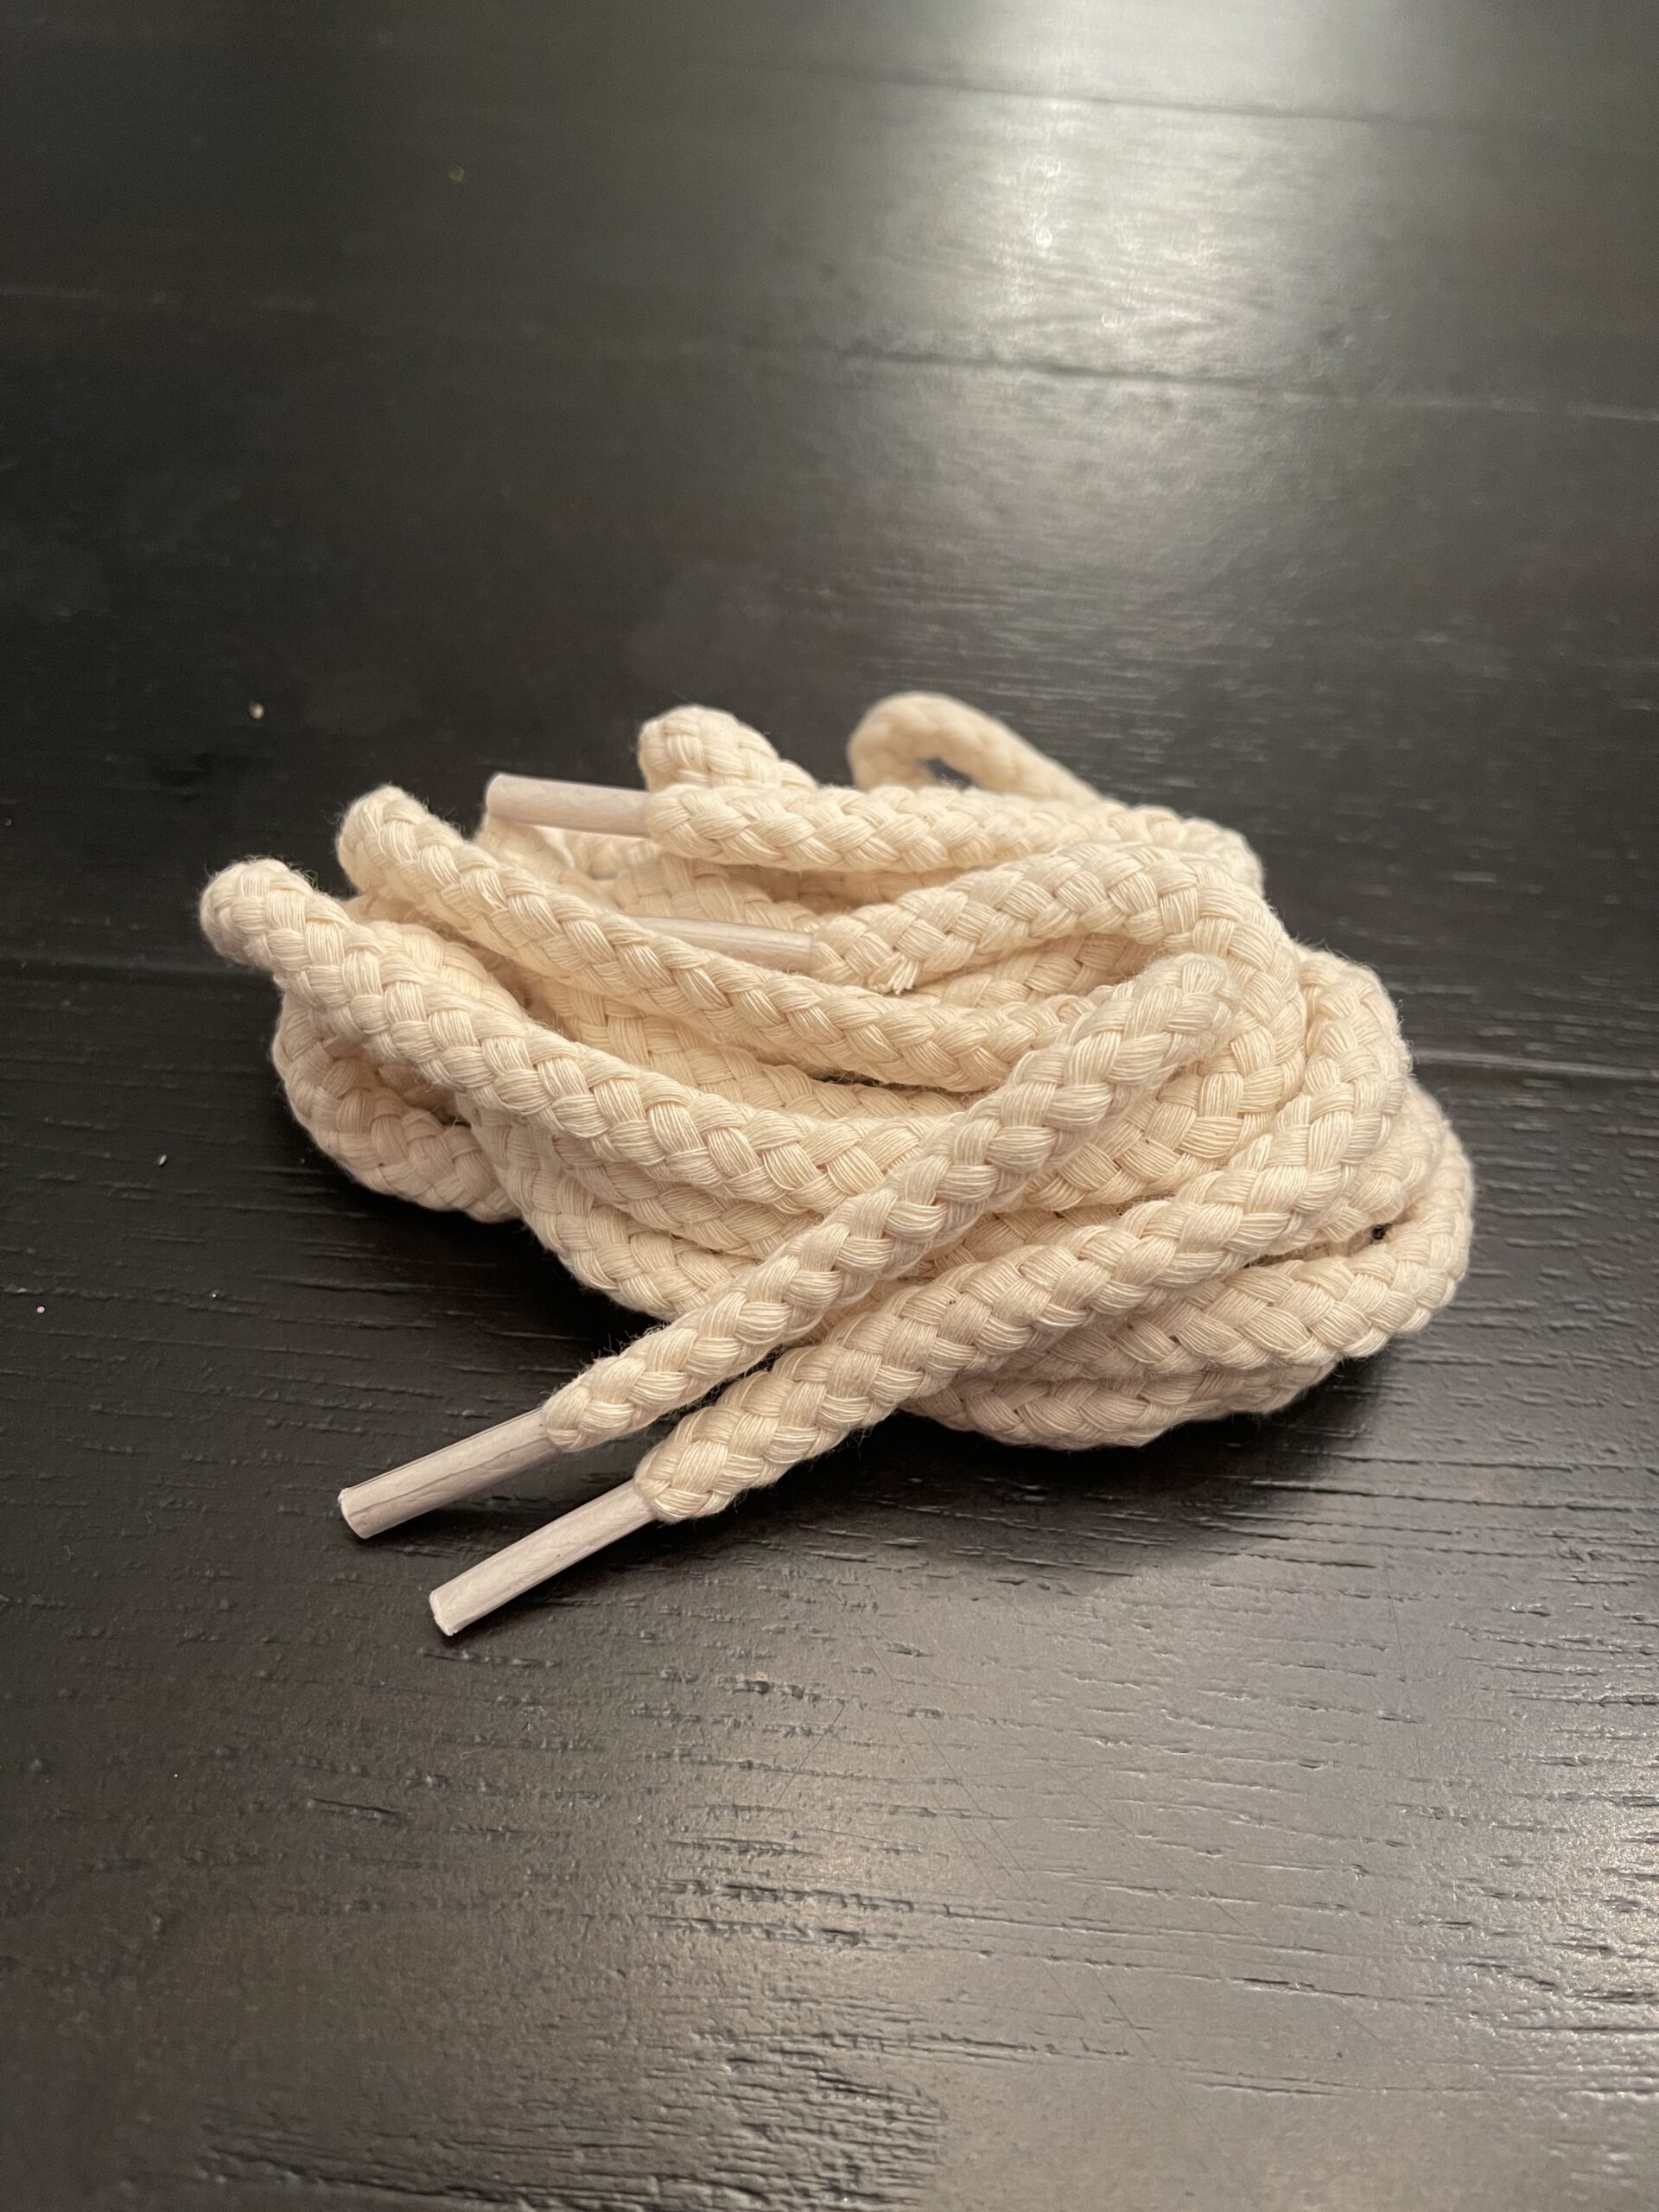 Chunky Laces White with White Aglets Natural Cotton Rope Shoelaces